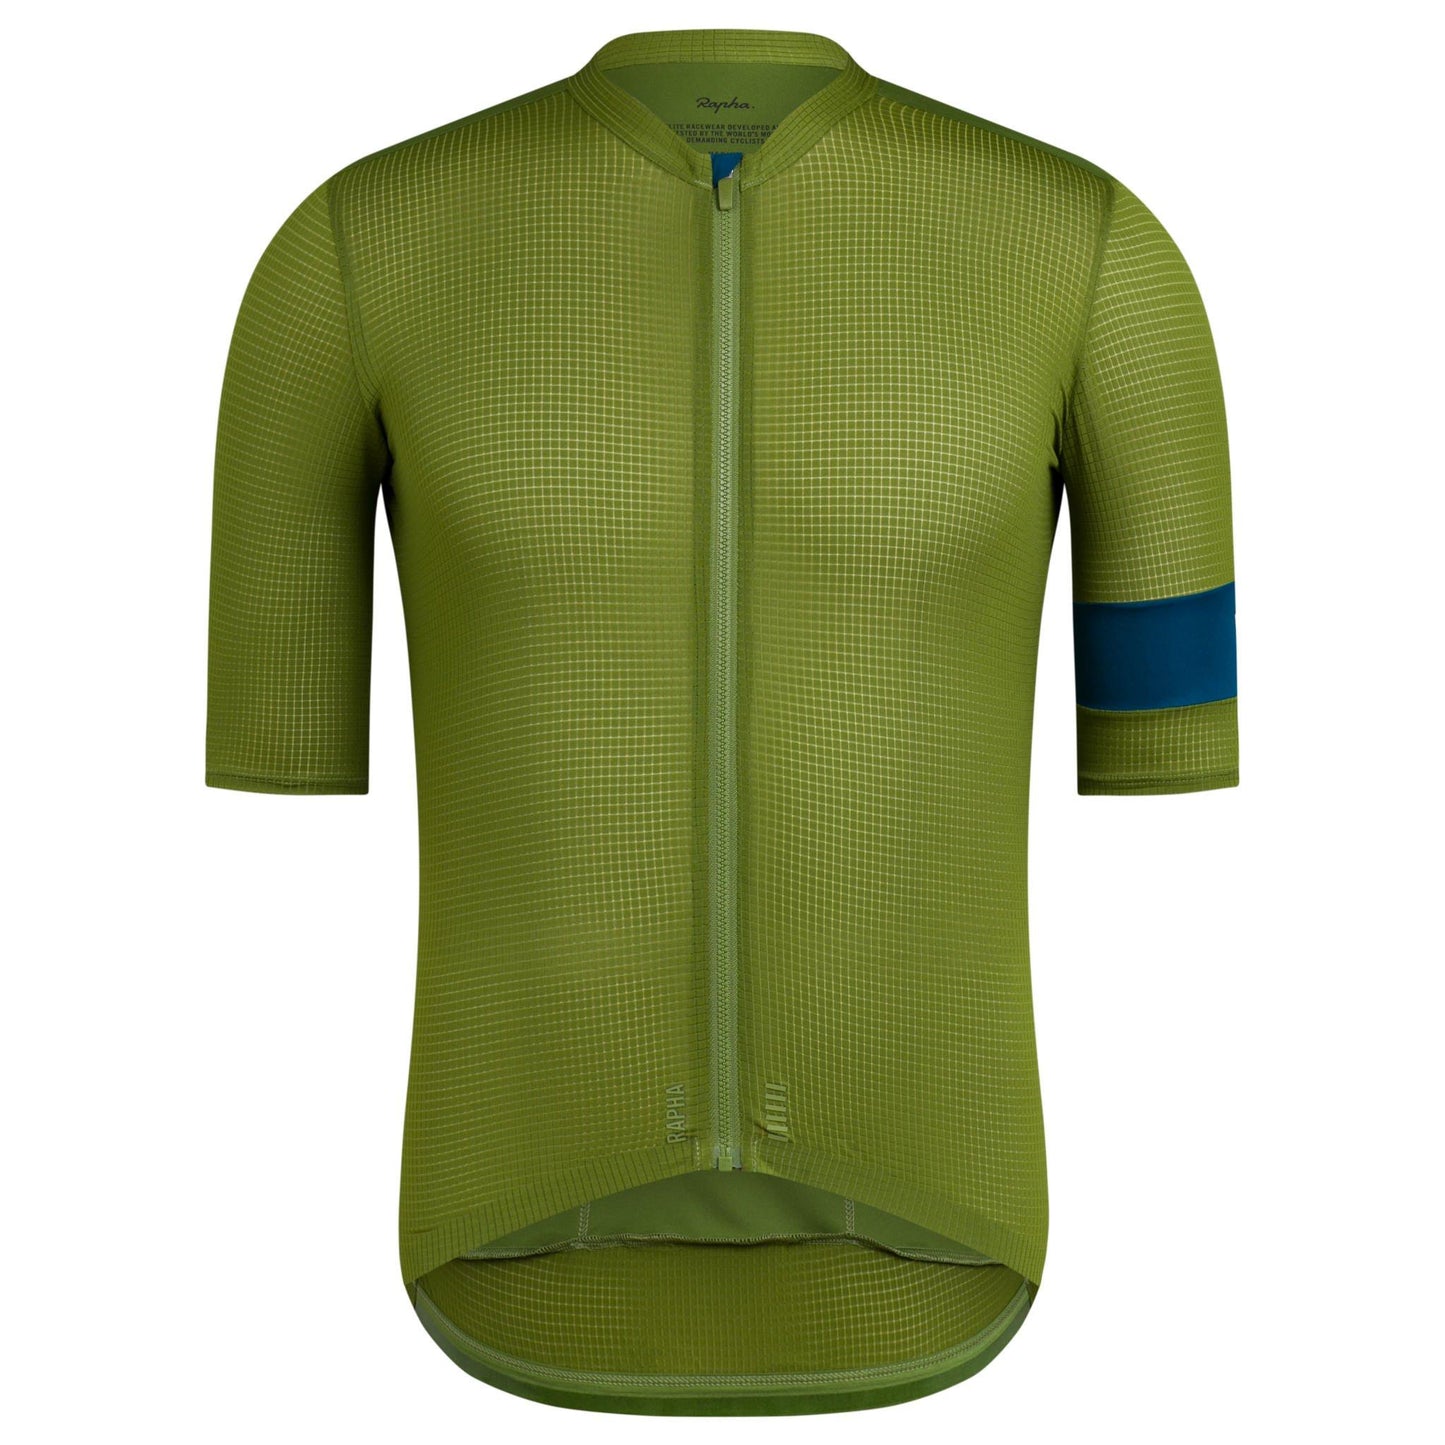 Rapha Mens Pro Team Flyweight Jersey, Green/Teal buy online at Woolys Wheels Sydney and receive free delivery Australiua-wide!